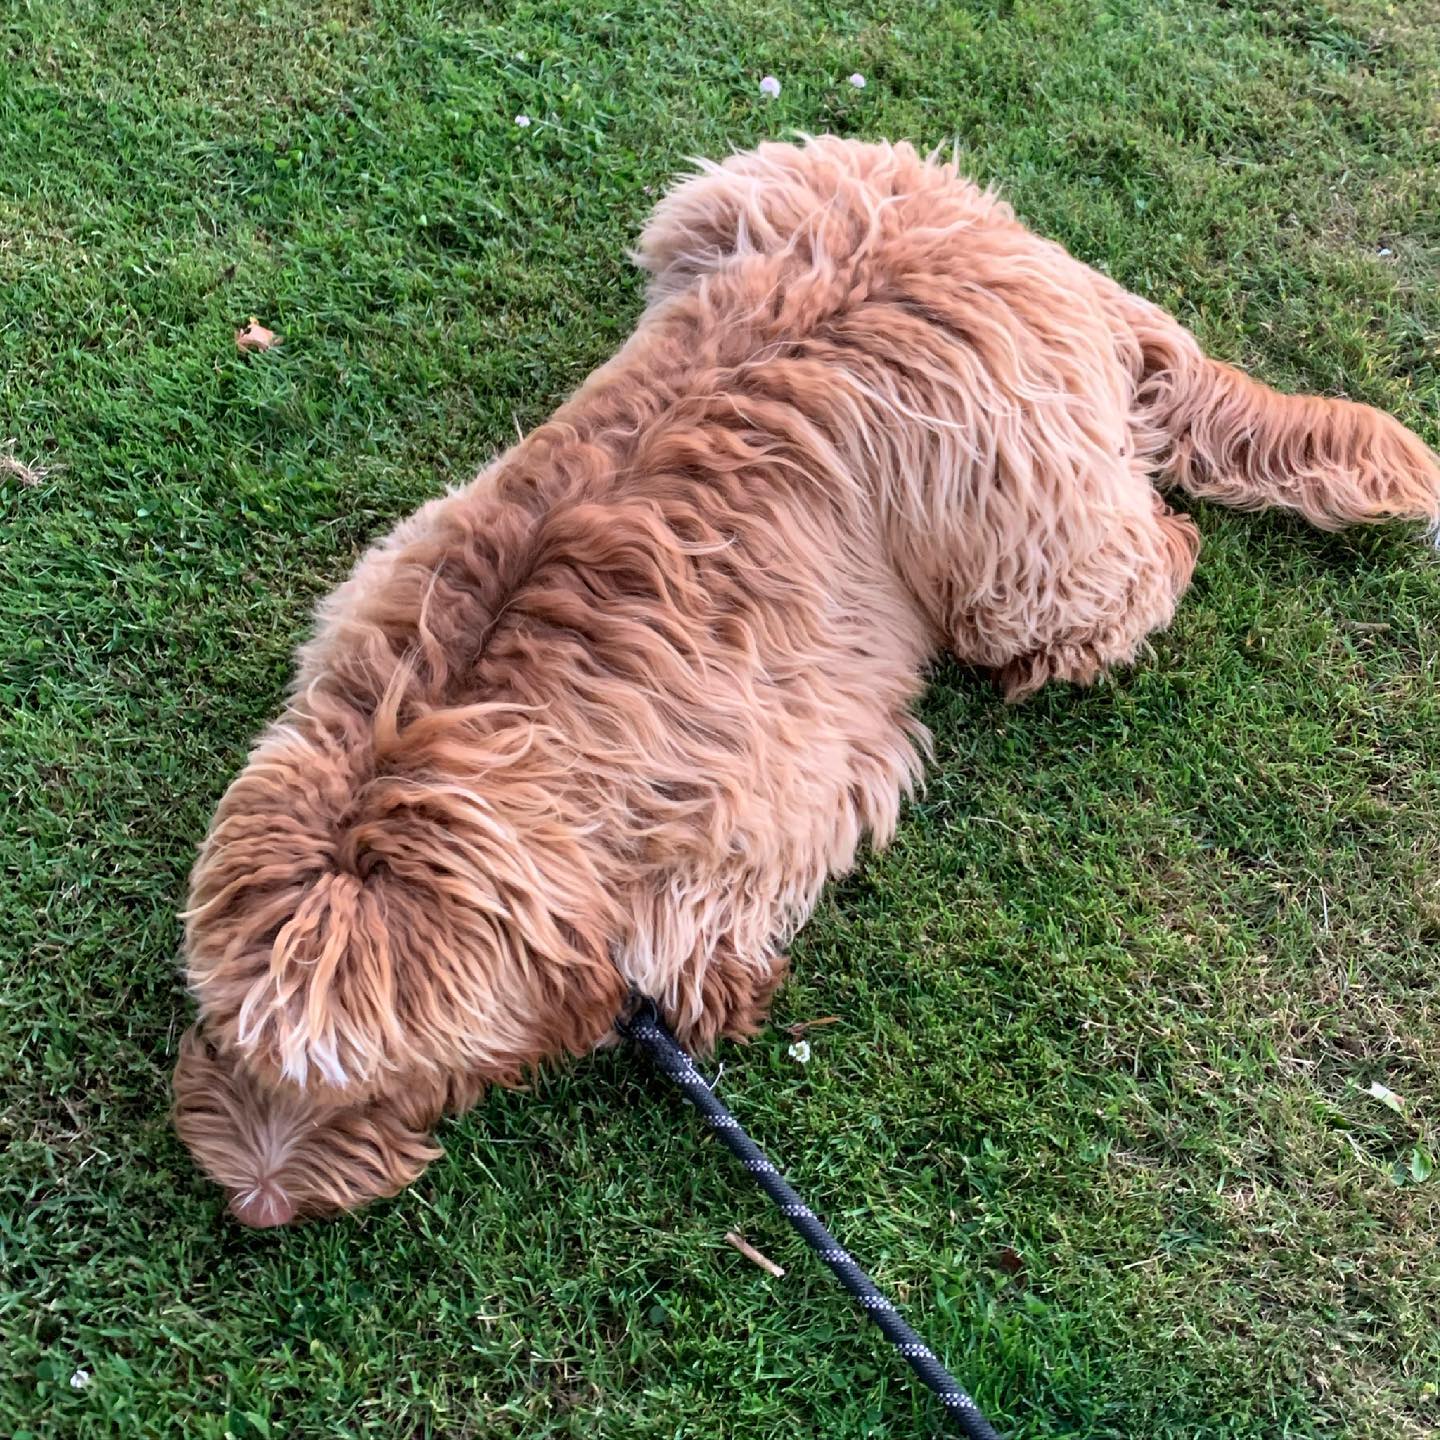 What happens when you take you dog for a walk and it is warm out? Well, @rusty.the.dog.yyj melts into the cool grass when he can find it. We call this the “poodle puddle”. #labradoodle #australianlabradoodle #sunvalleylabradoodles #puppy #yyj #dogsofinstagram #dogsofig #rustydoodle #poodlepuddle